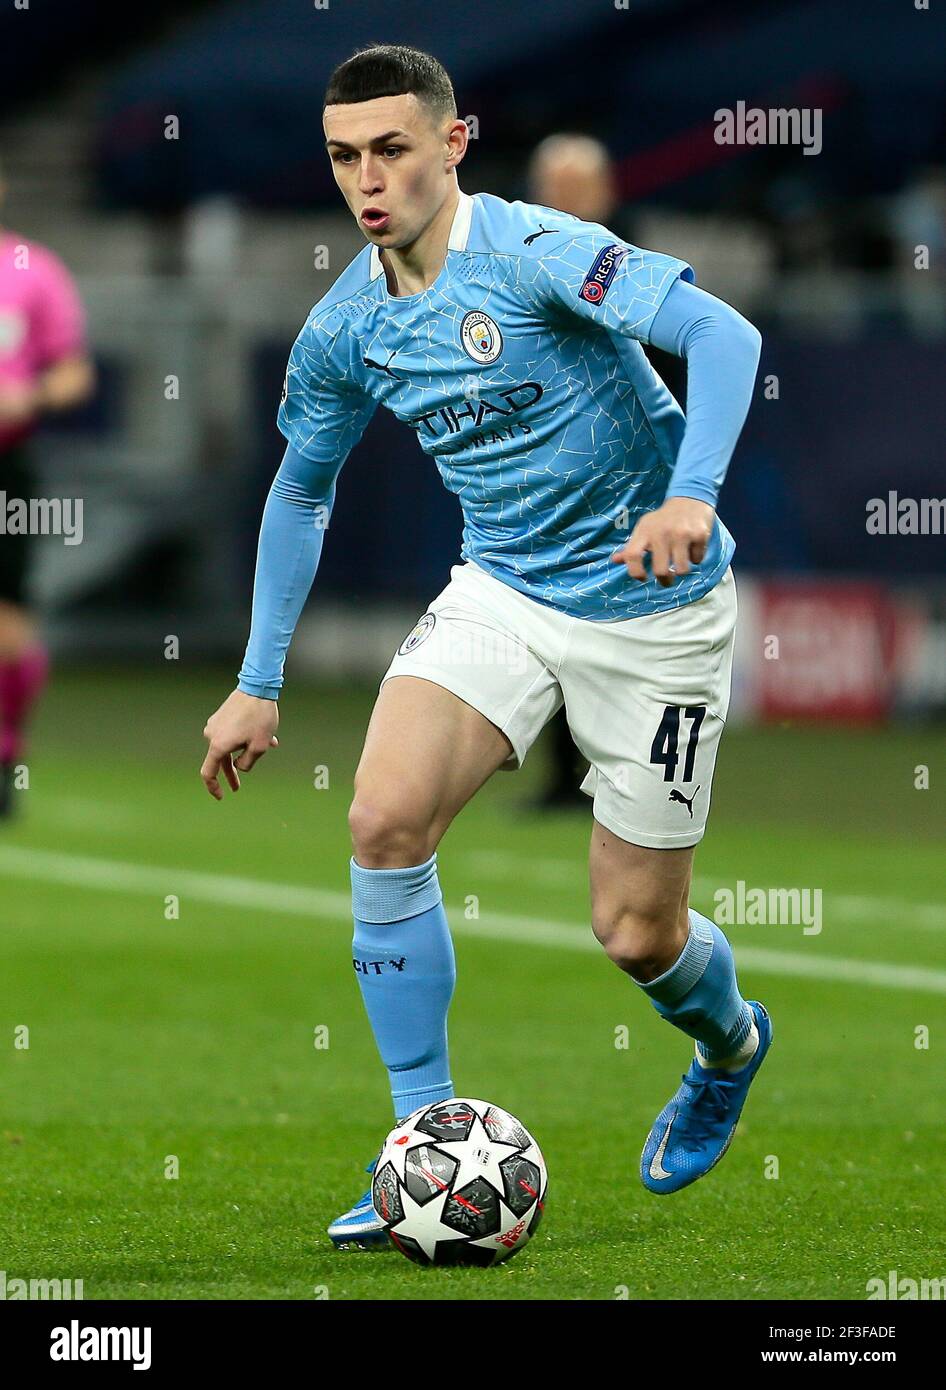 Manchester City's Phil Foden in action during the Champions League round of 16 second leg match at Puskas Arena, Budapest. Picture date: Tuesday March 16, 2021. Stock Photo